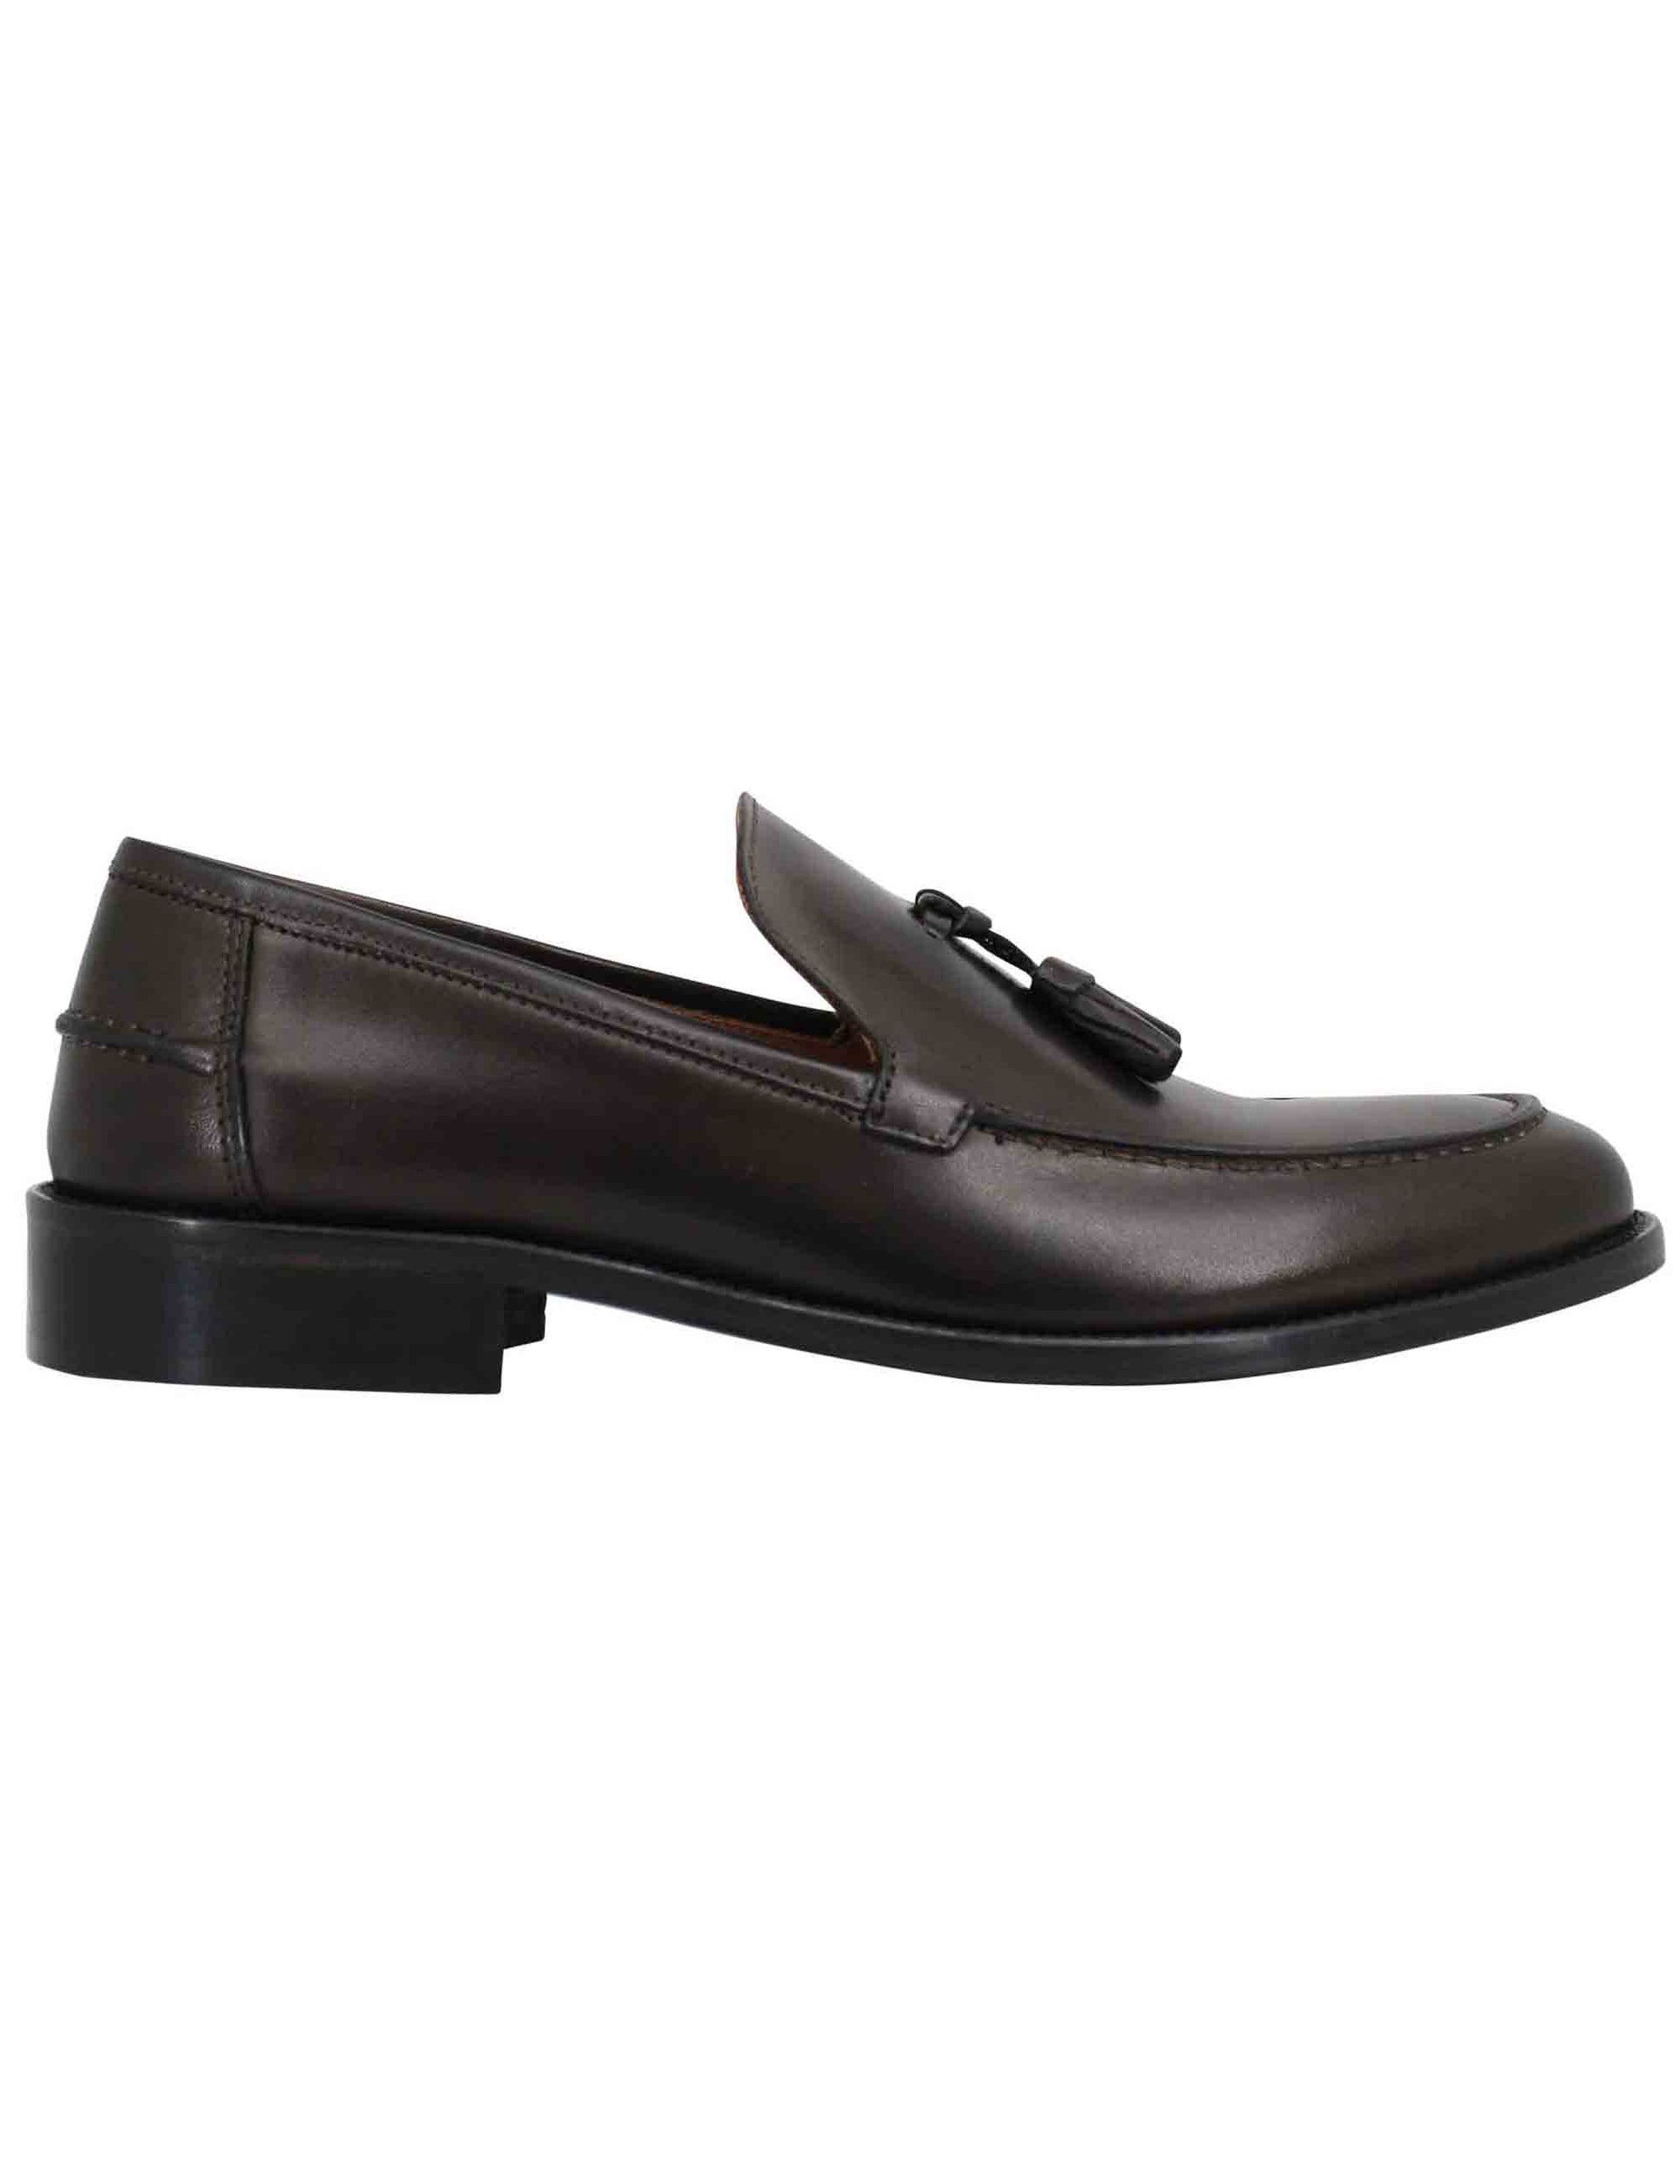 Men's moccasins in dark brown leather with stitched leather sole and tassels